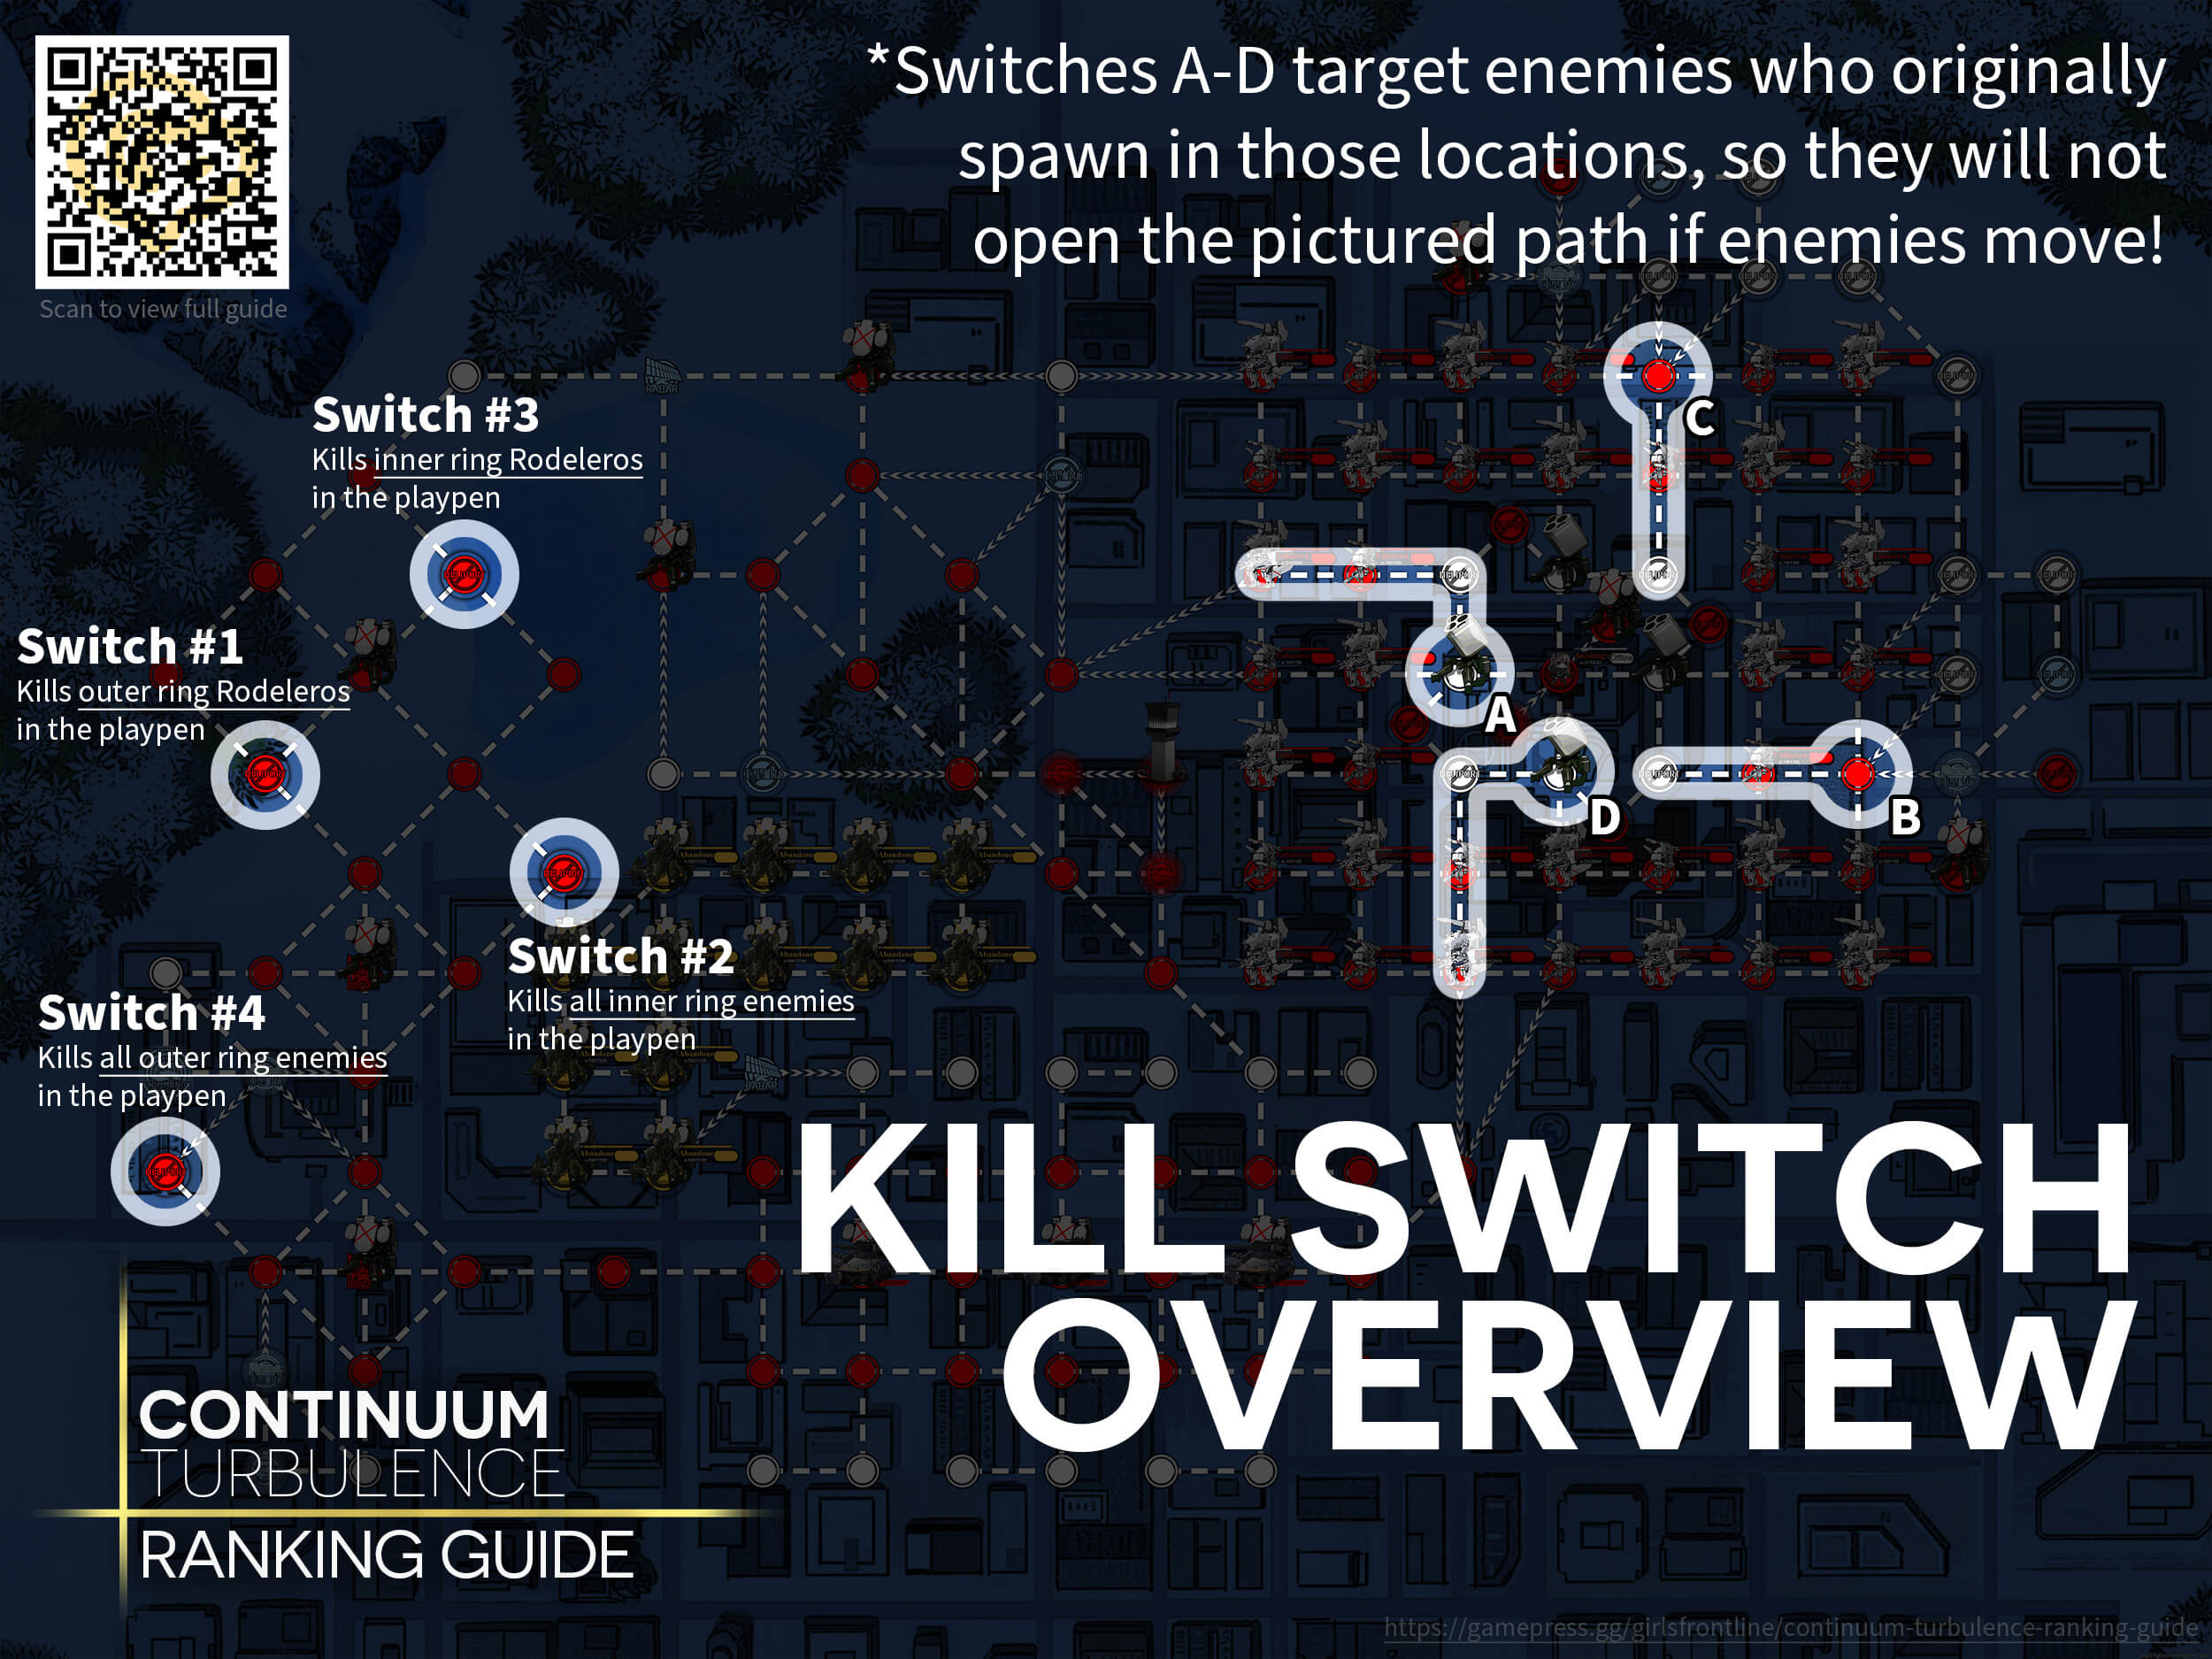 Overview of the 8 kill switches and their locations